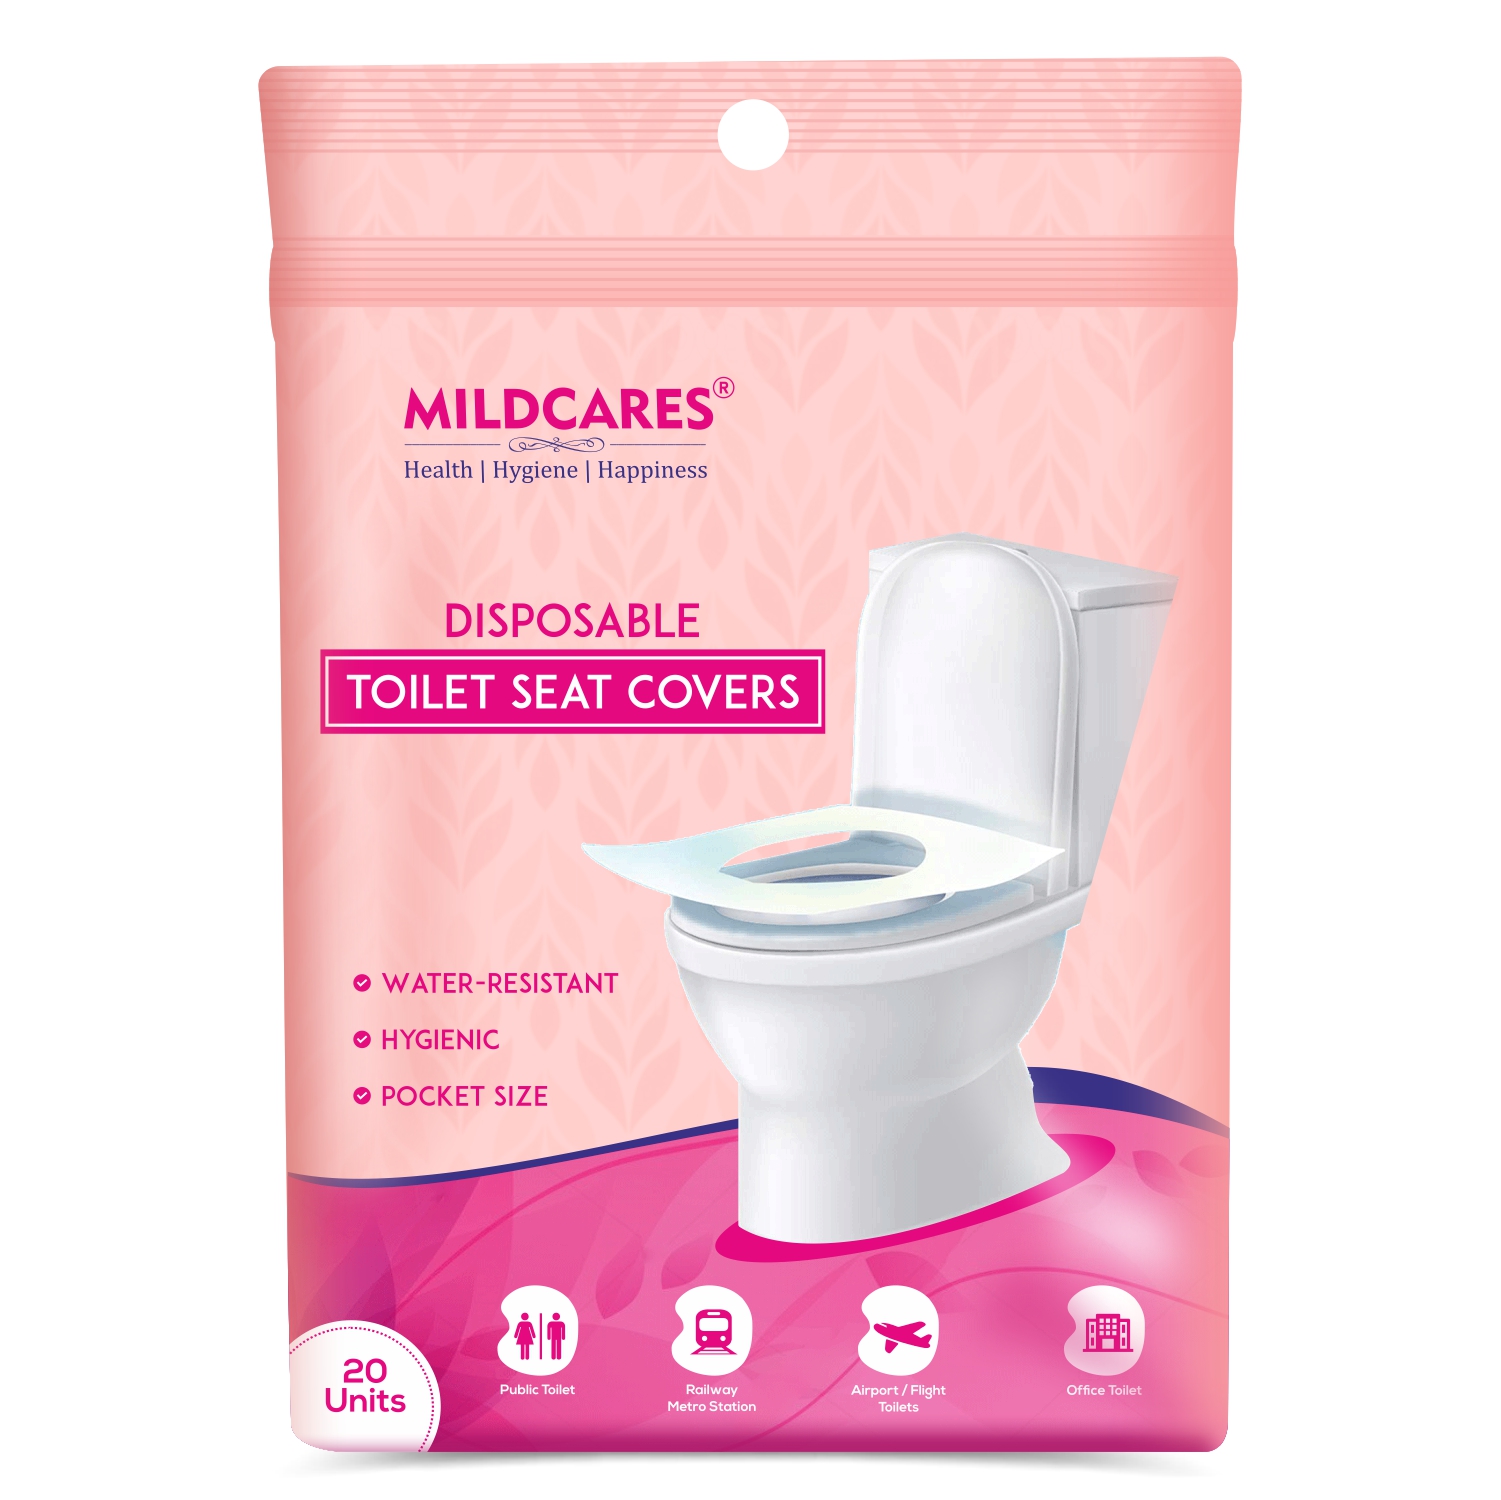 MILDCARES Disposable Toilet Seat Covers | No Direct Contact With Unhygienic Seats | Travel-Friendly